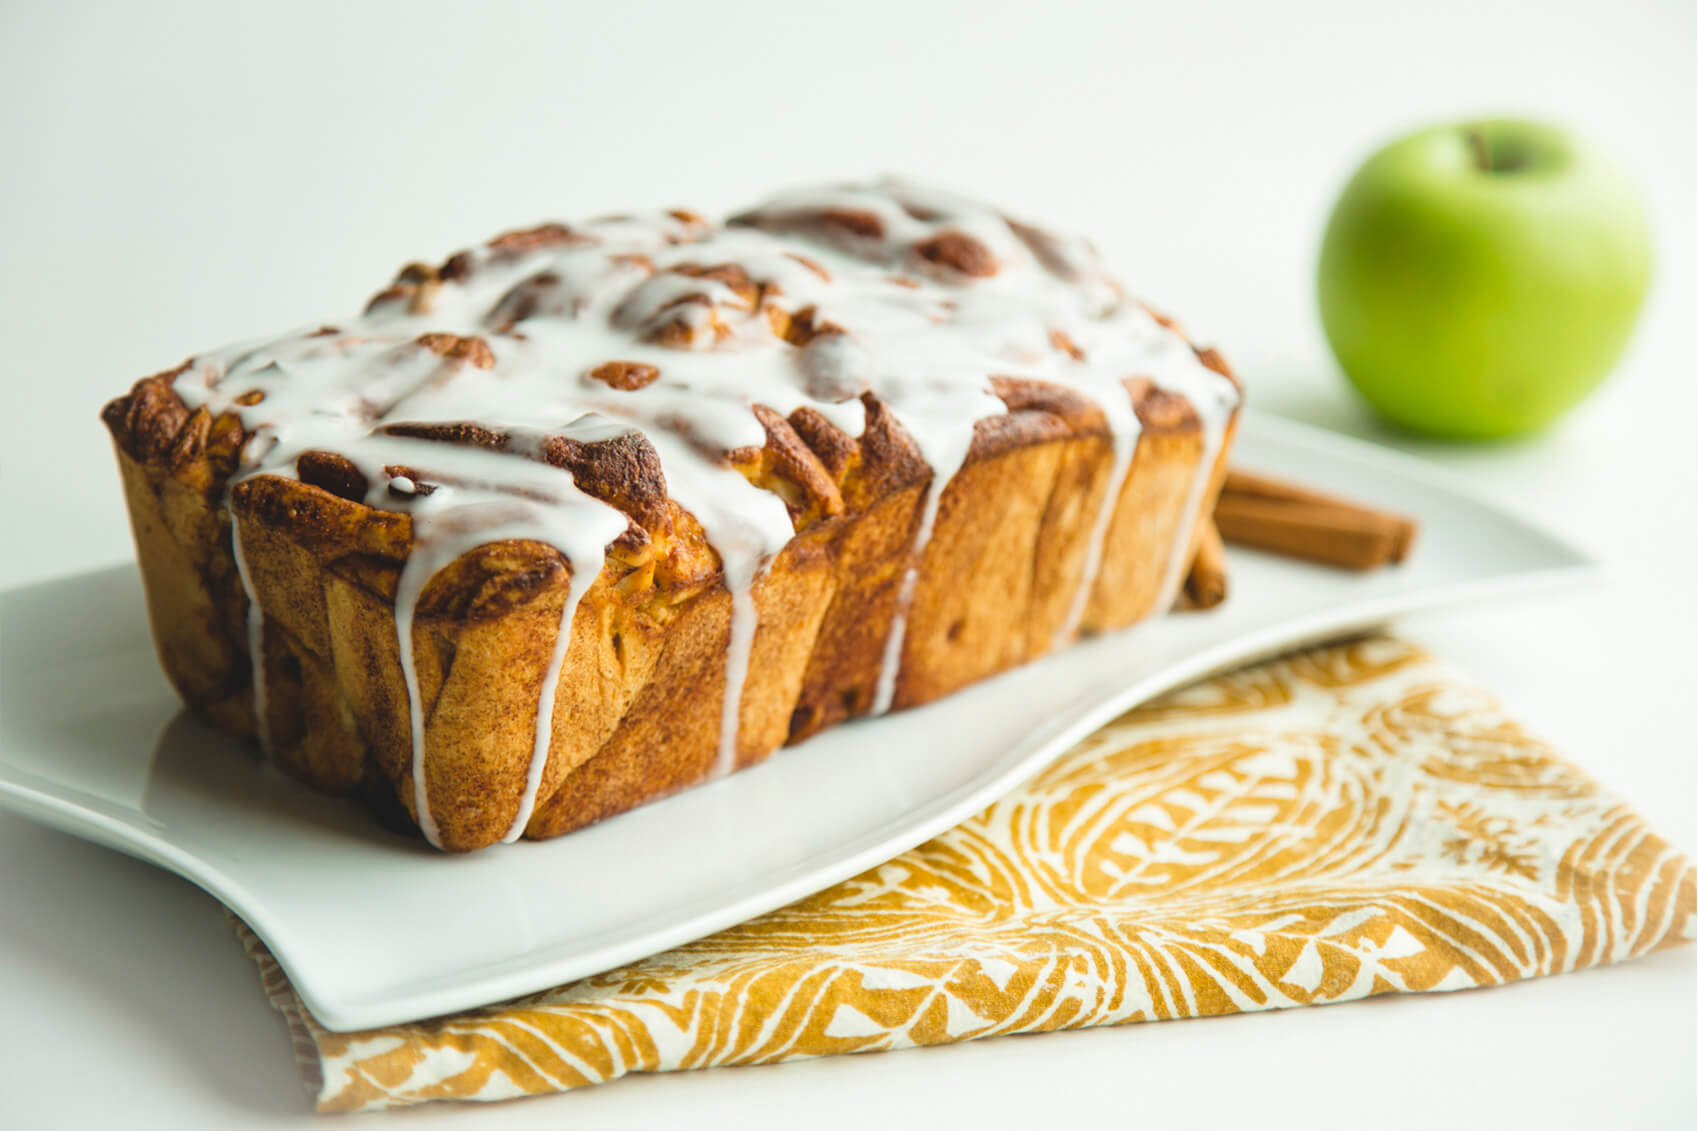 With all the great flavor of apple pie, this bread is perfect for autumn.